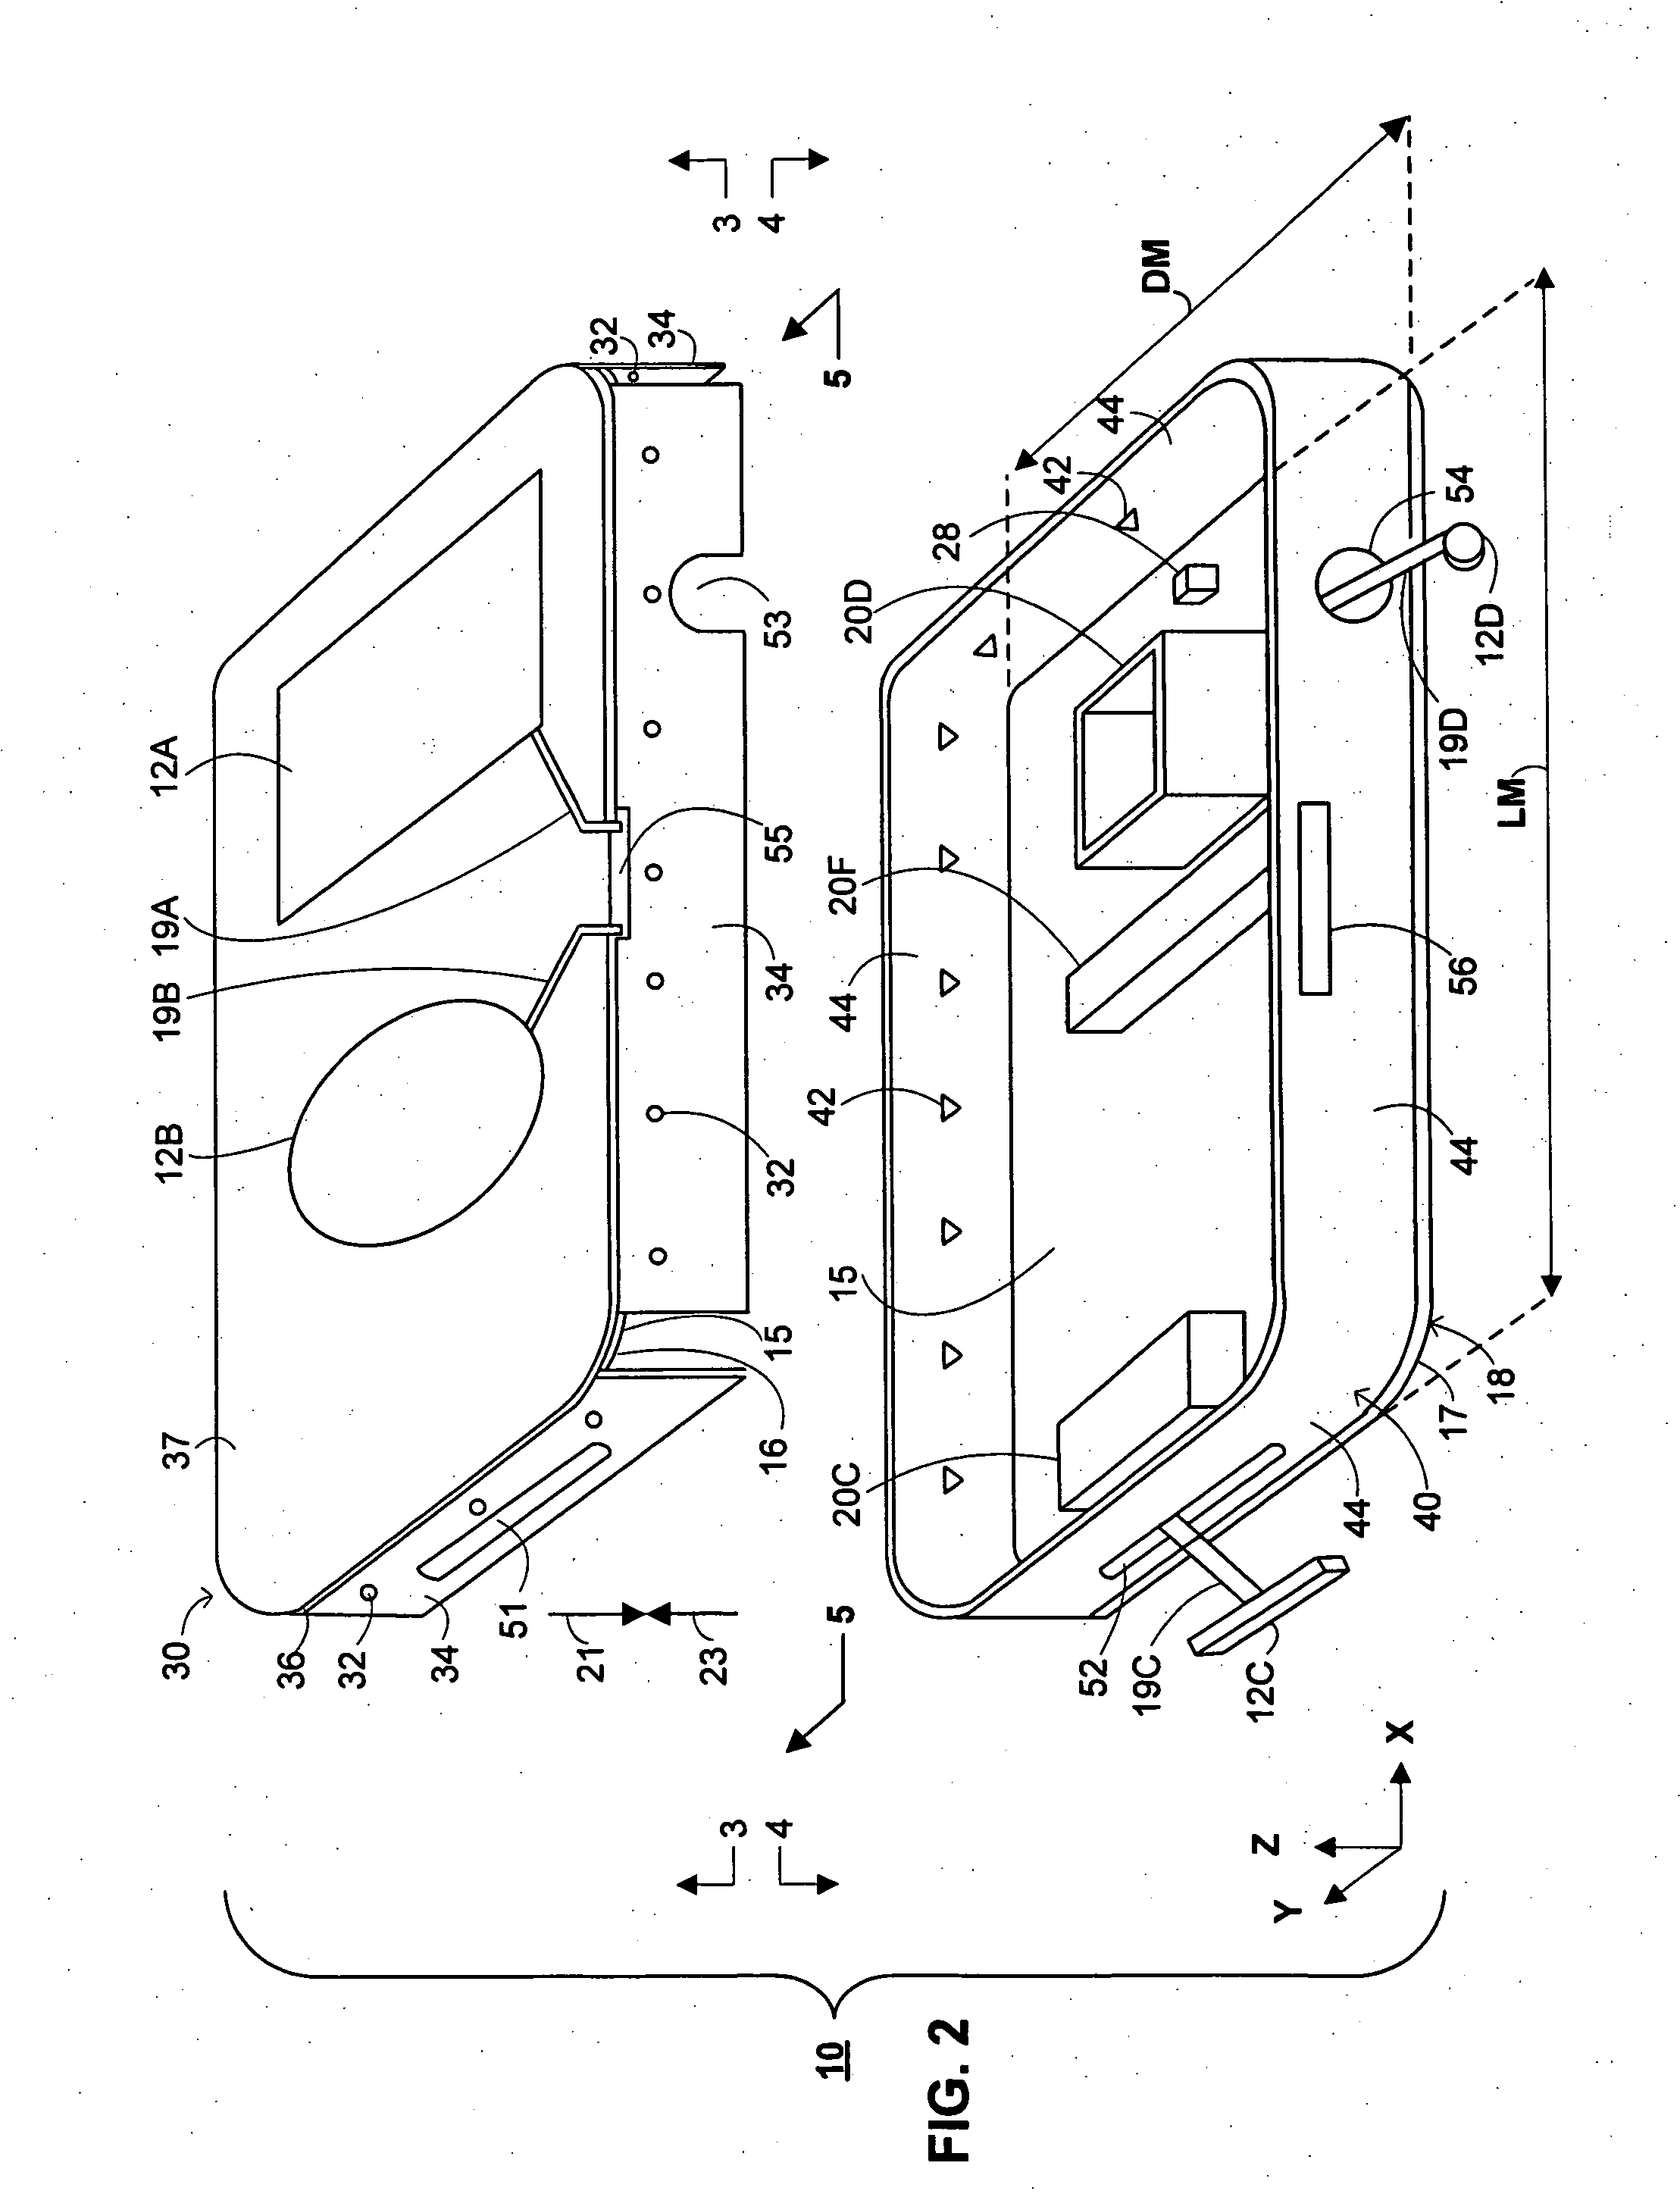 Multiple circuit board arrangements in electronic devices